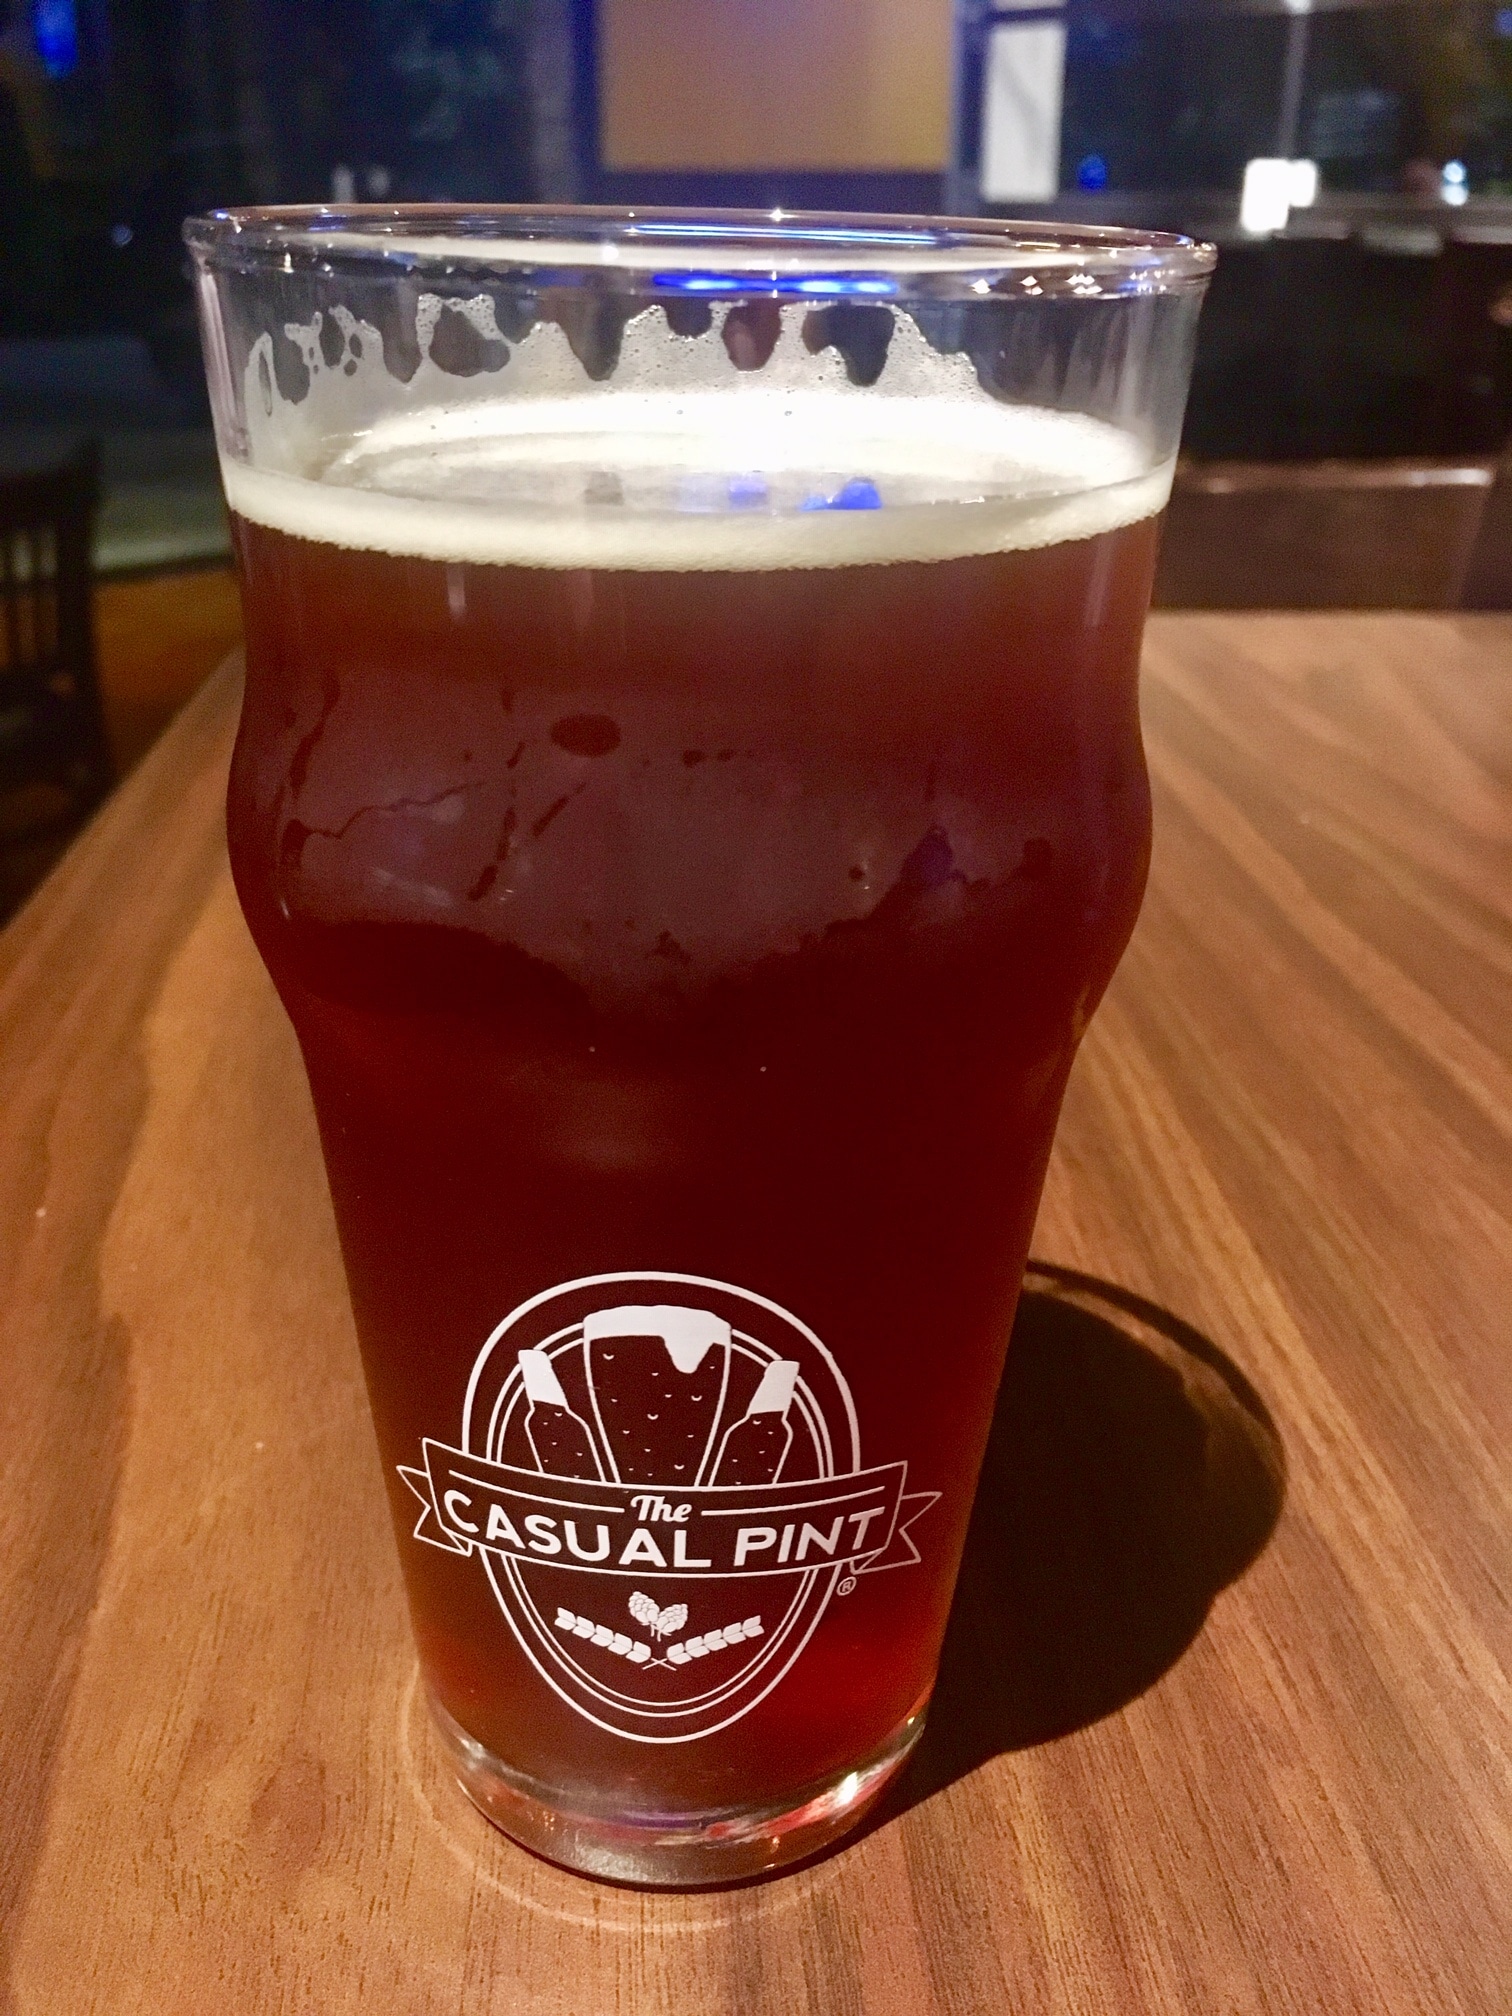 IMG 0422 Sneak peek: The Casual Pint at The Grove in Hoover is like "Cheers with craft beer"